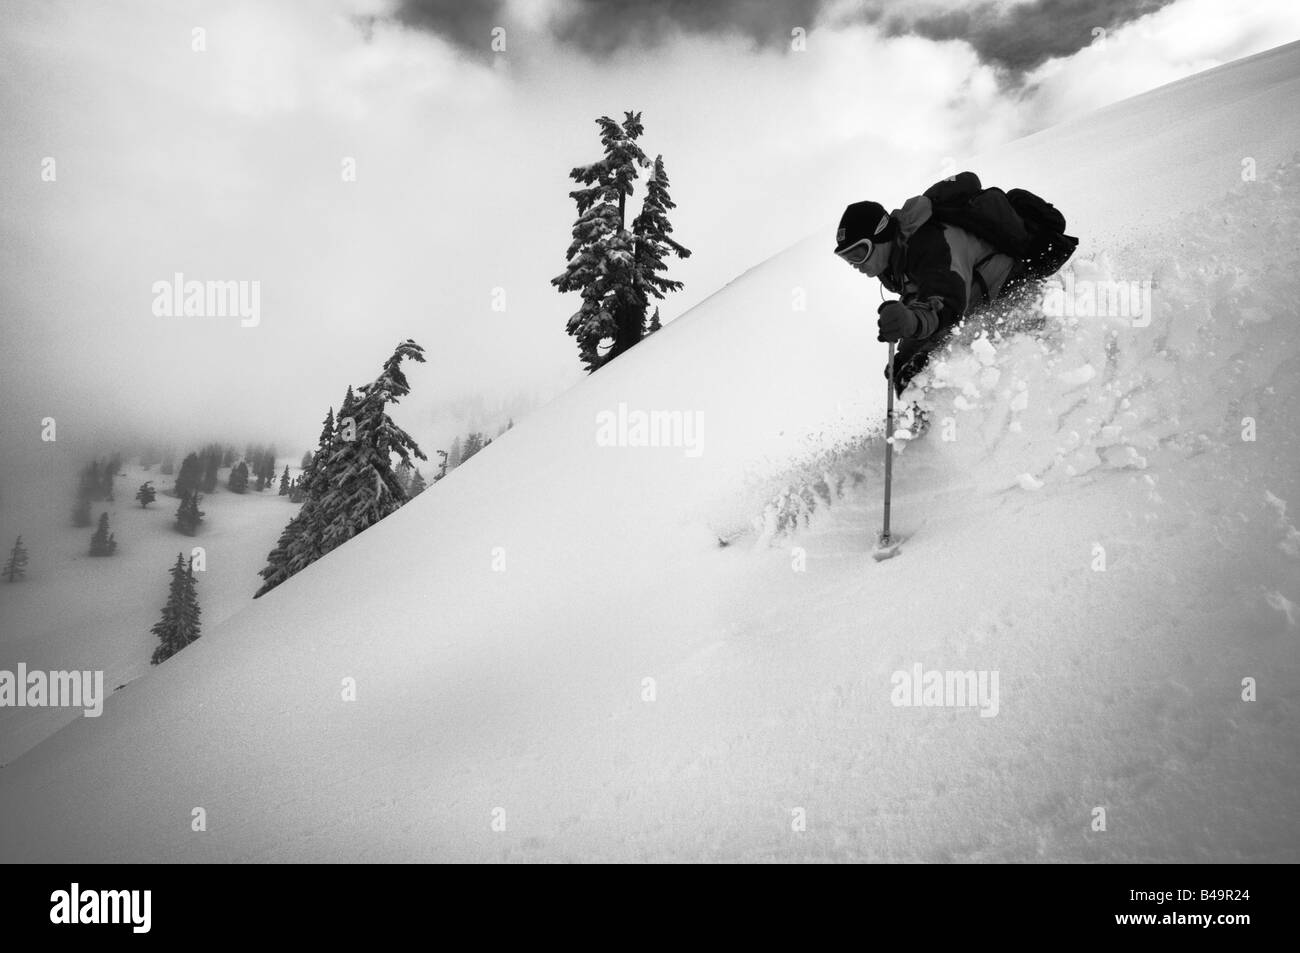 A skier descending a pristine slope and silhouetted against a cloudy sky Stock Photo